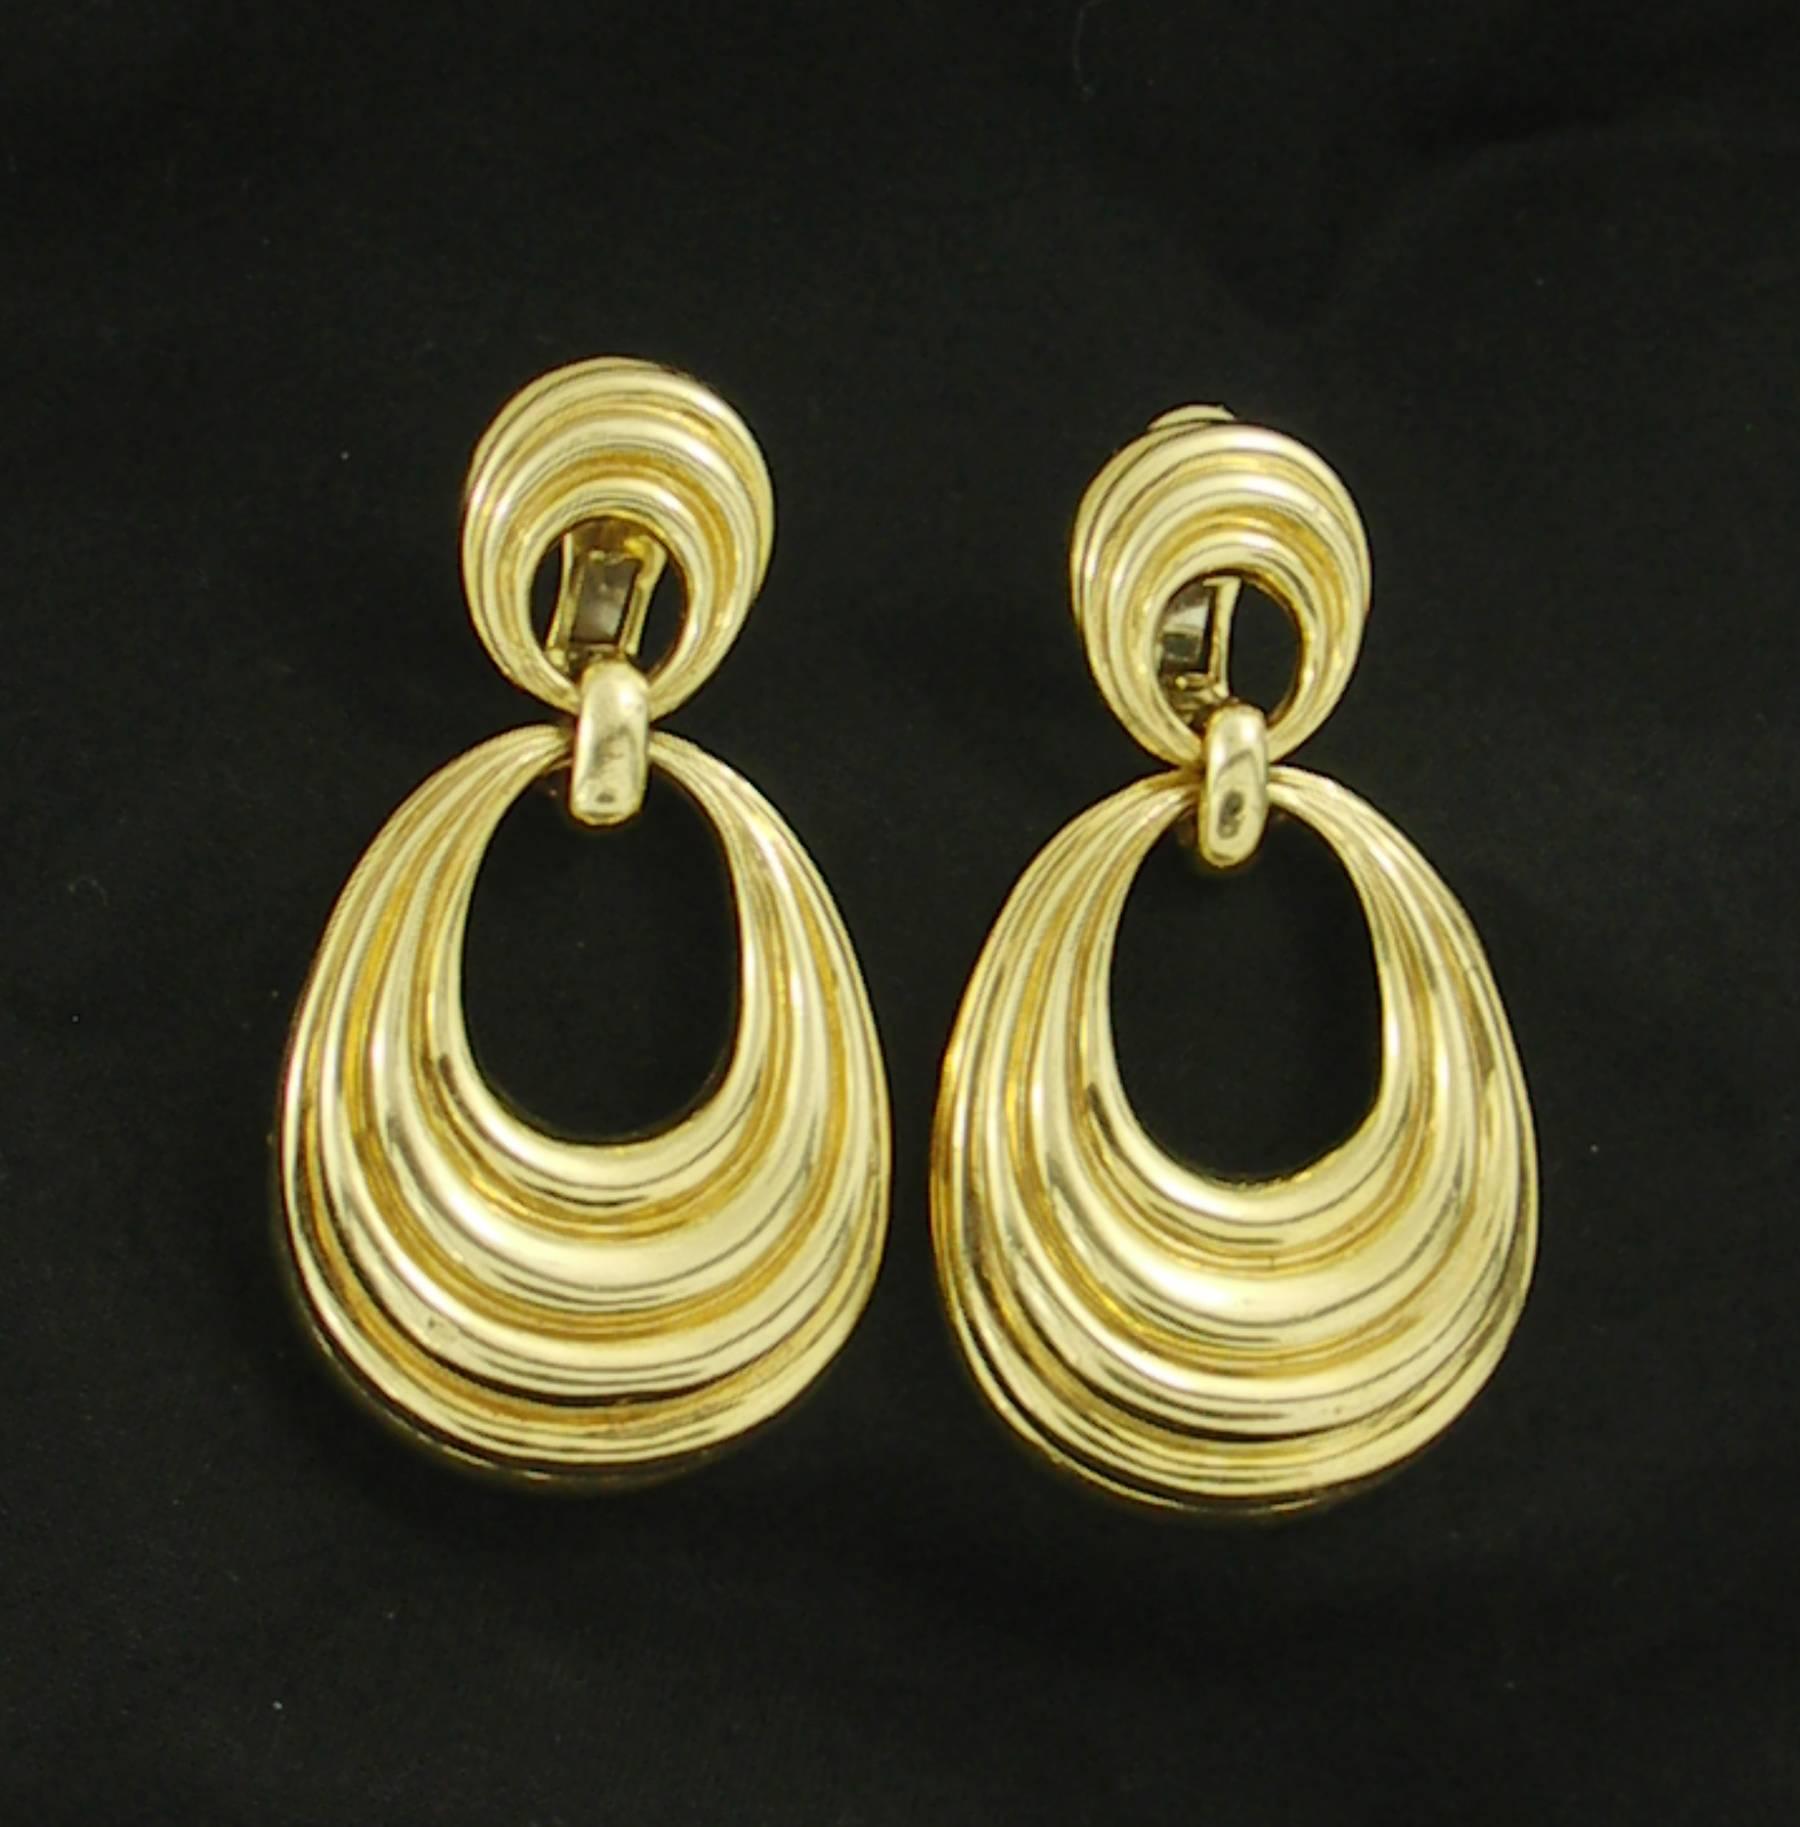 A pair of 18K yellow gold hanging earrings, with a swag design, and high polished finish. Measuring 2 1/2 inches long, they are sleek, and sophisticated. Signed David Webb